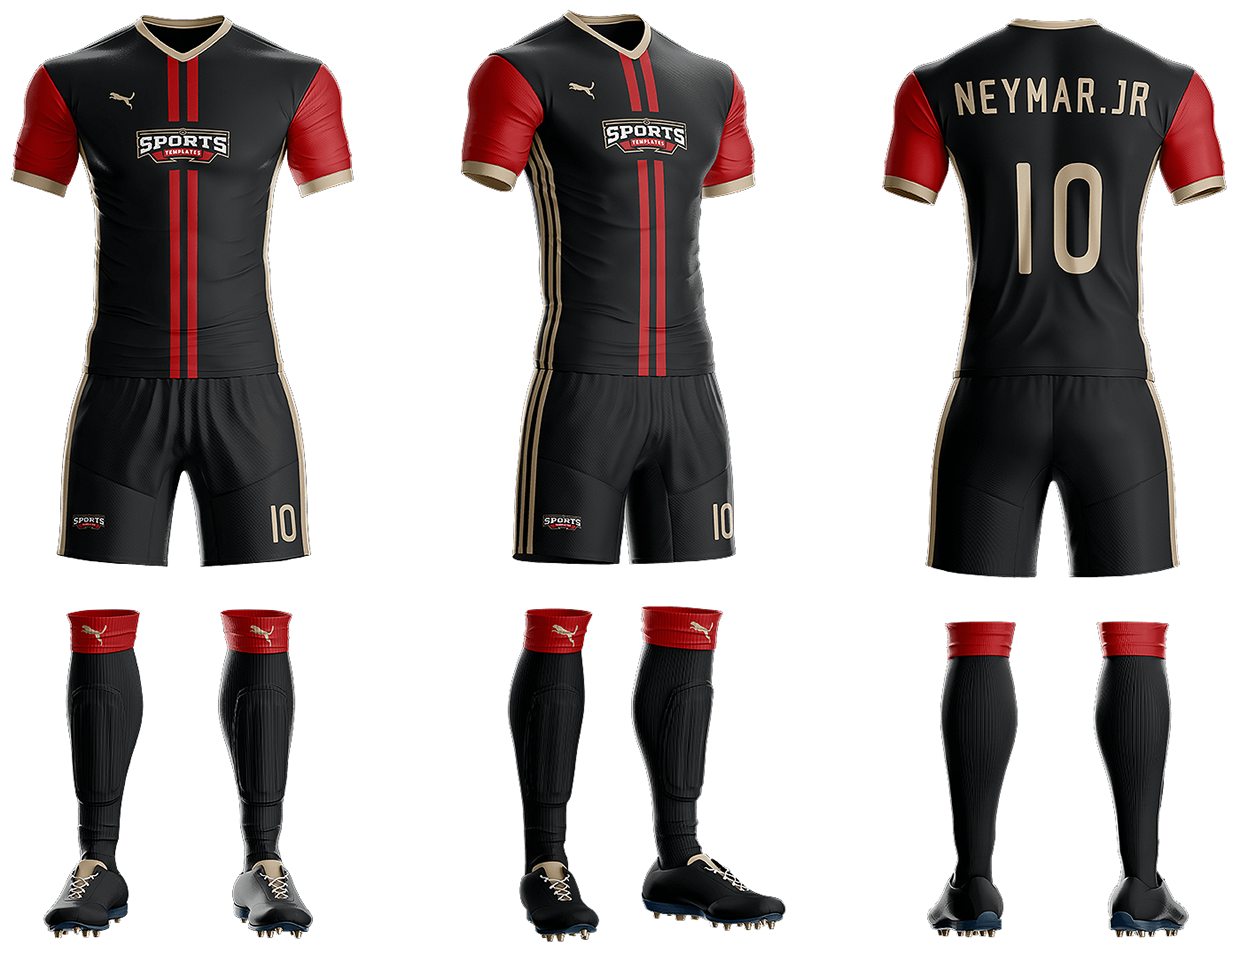 The Most Realistic Soccer Kit Uniform Template is here! - Concepts